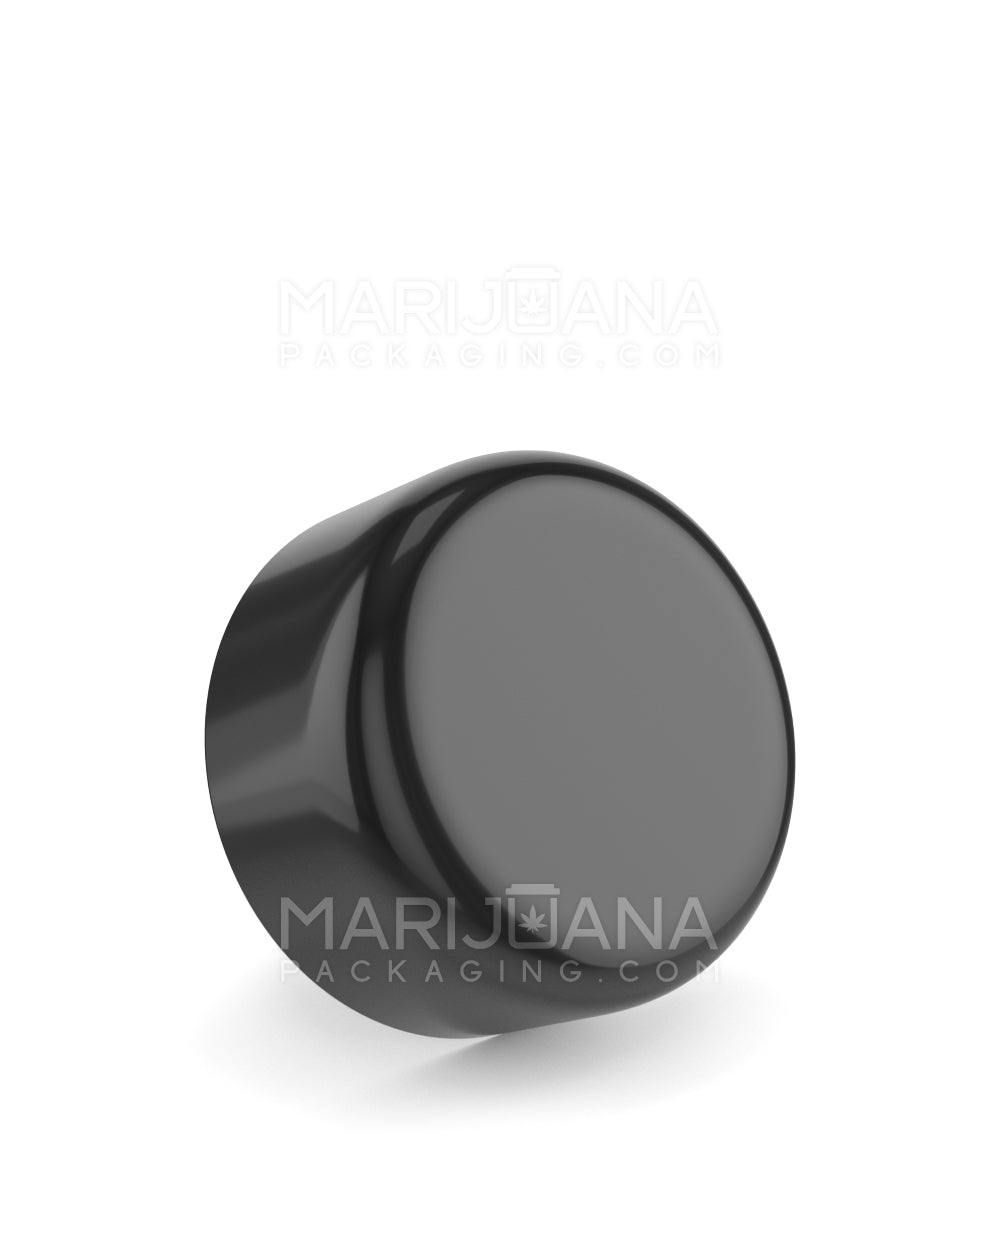 Child Resistant | Dome Push Down & Turn Plastic Caps w/ Foam Liner | 53mm - Glossy Black - 80 Count - 1